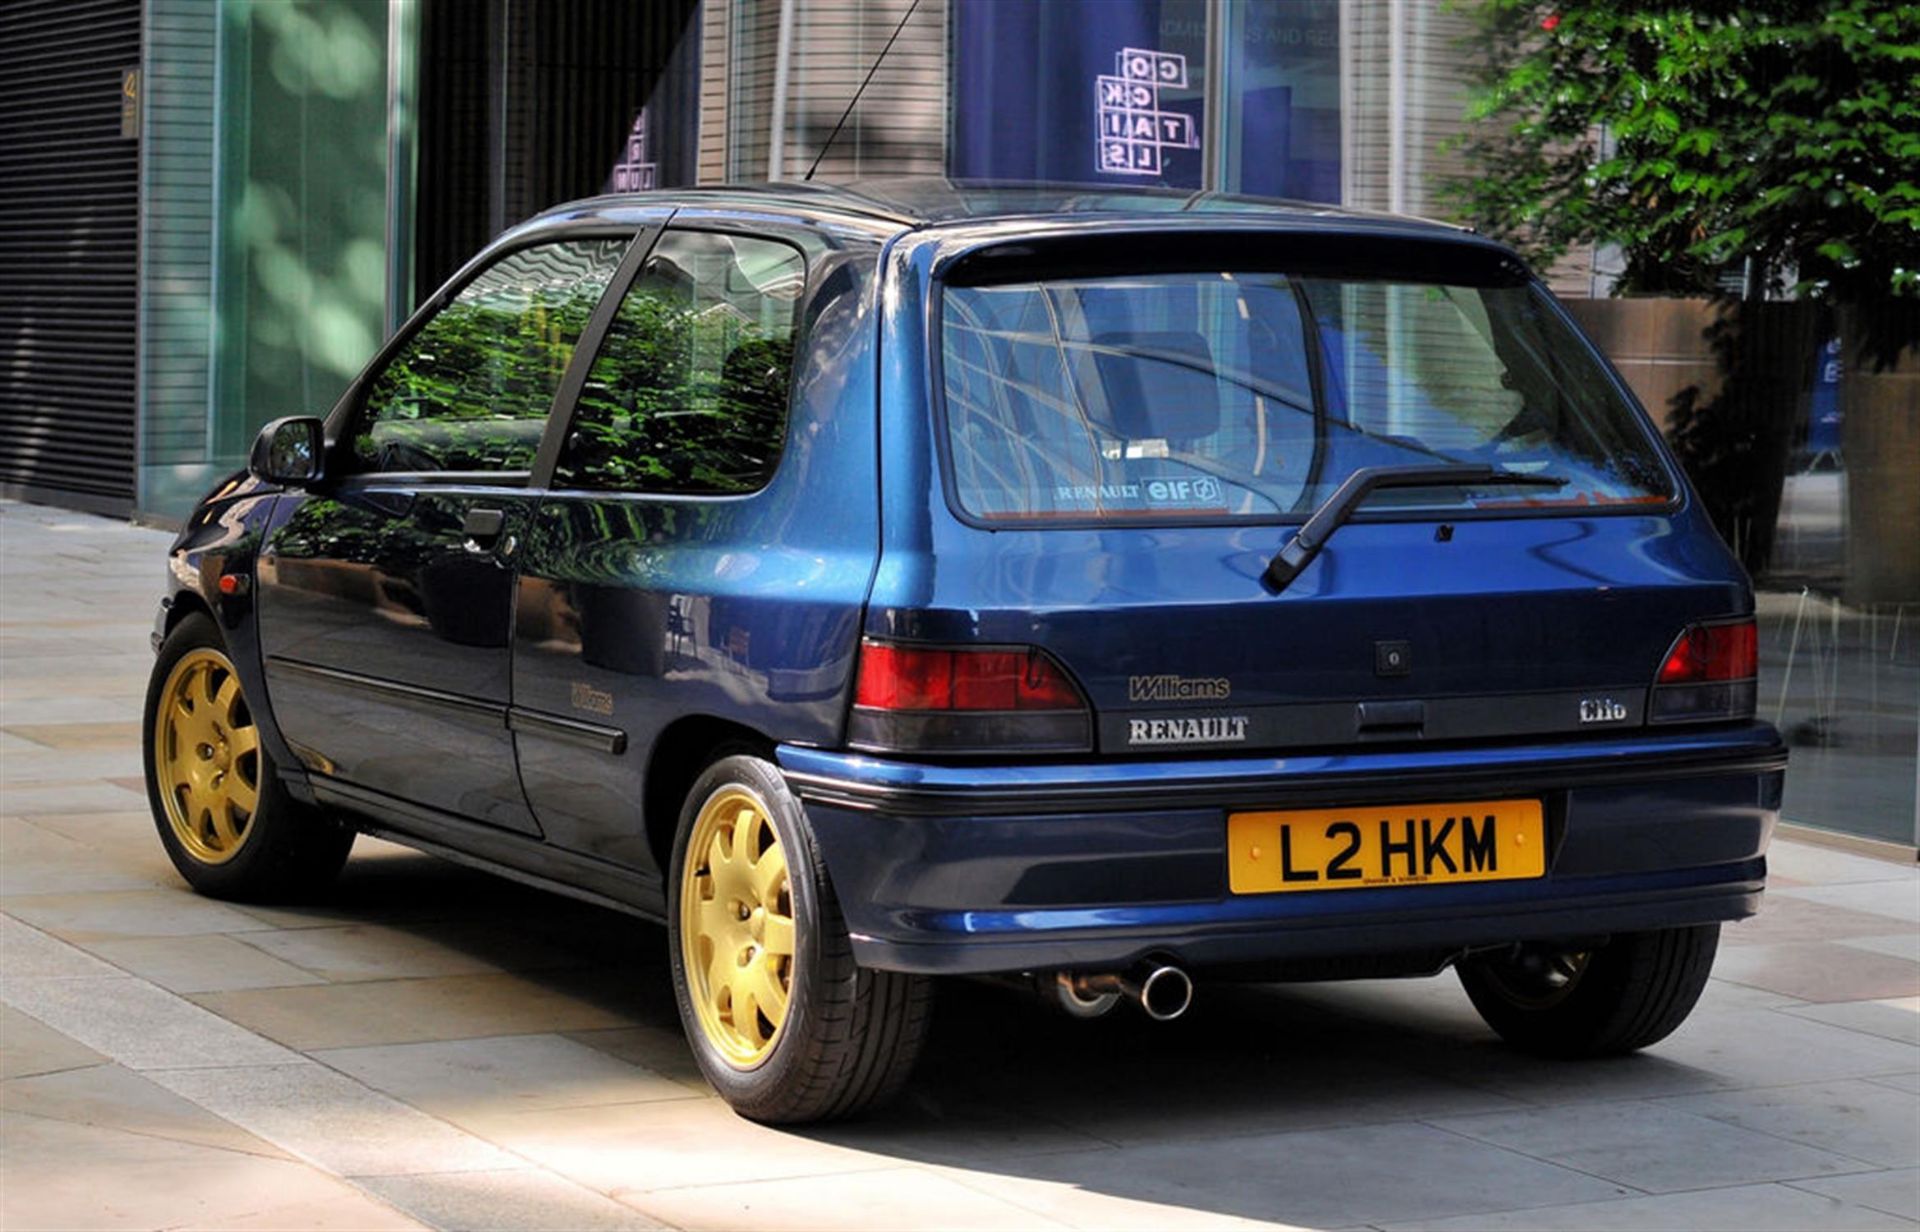 1994 Renault Clio Williams (Phase One) #0180 - Image 7 of 10